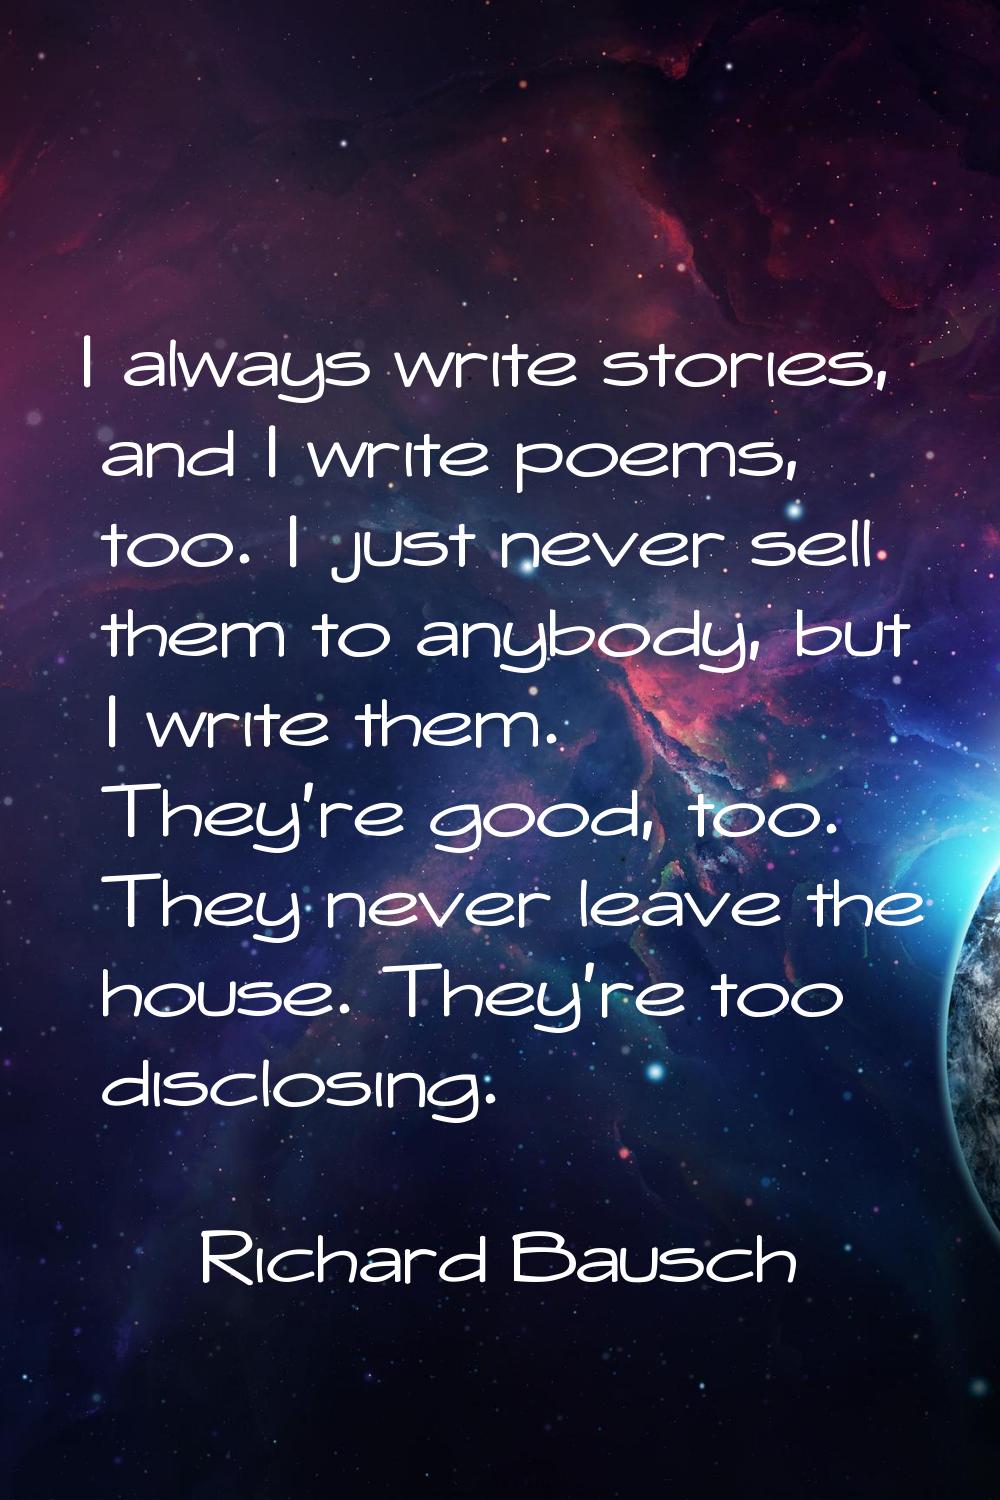 I always write stories, and I write poems, too. I just never sell them to anybody, but I write them